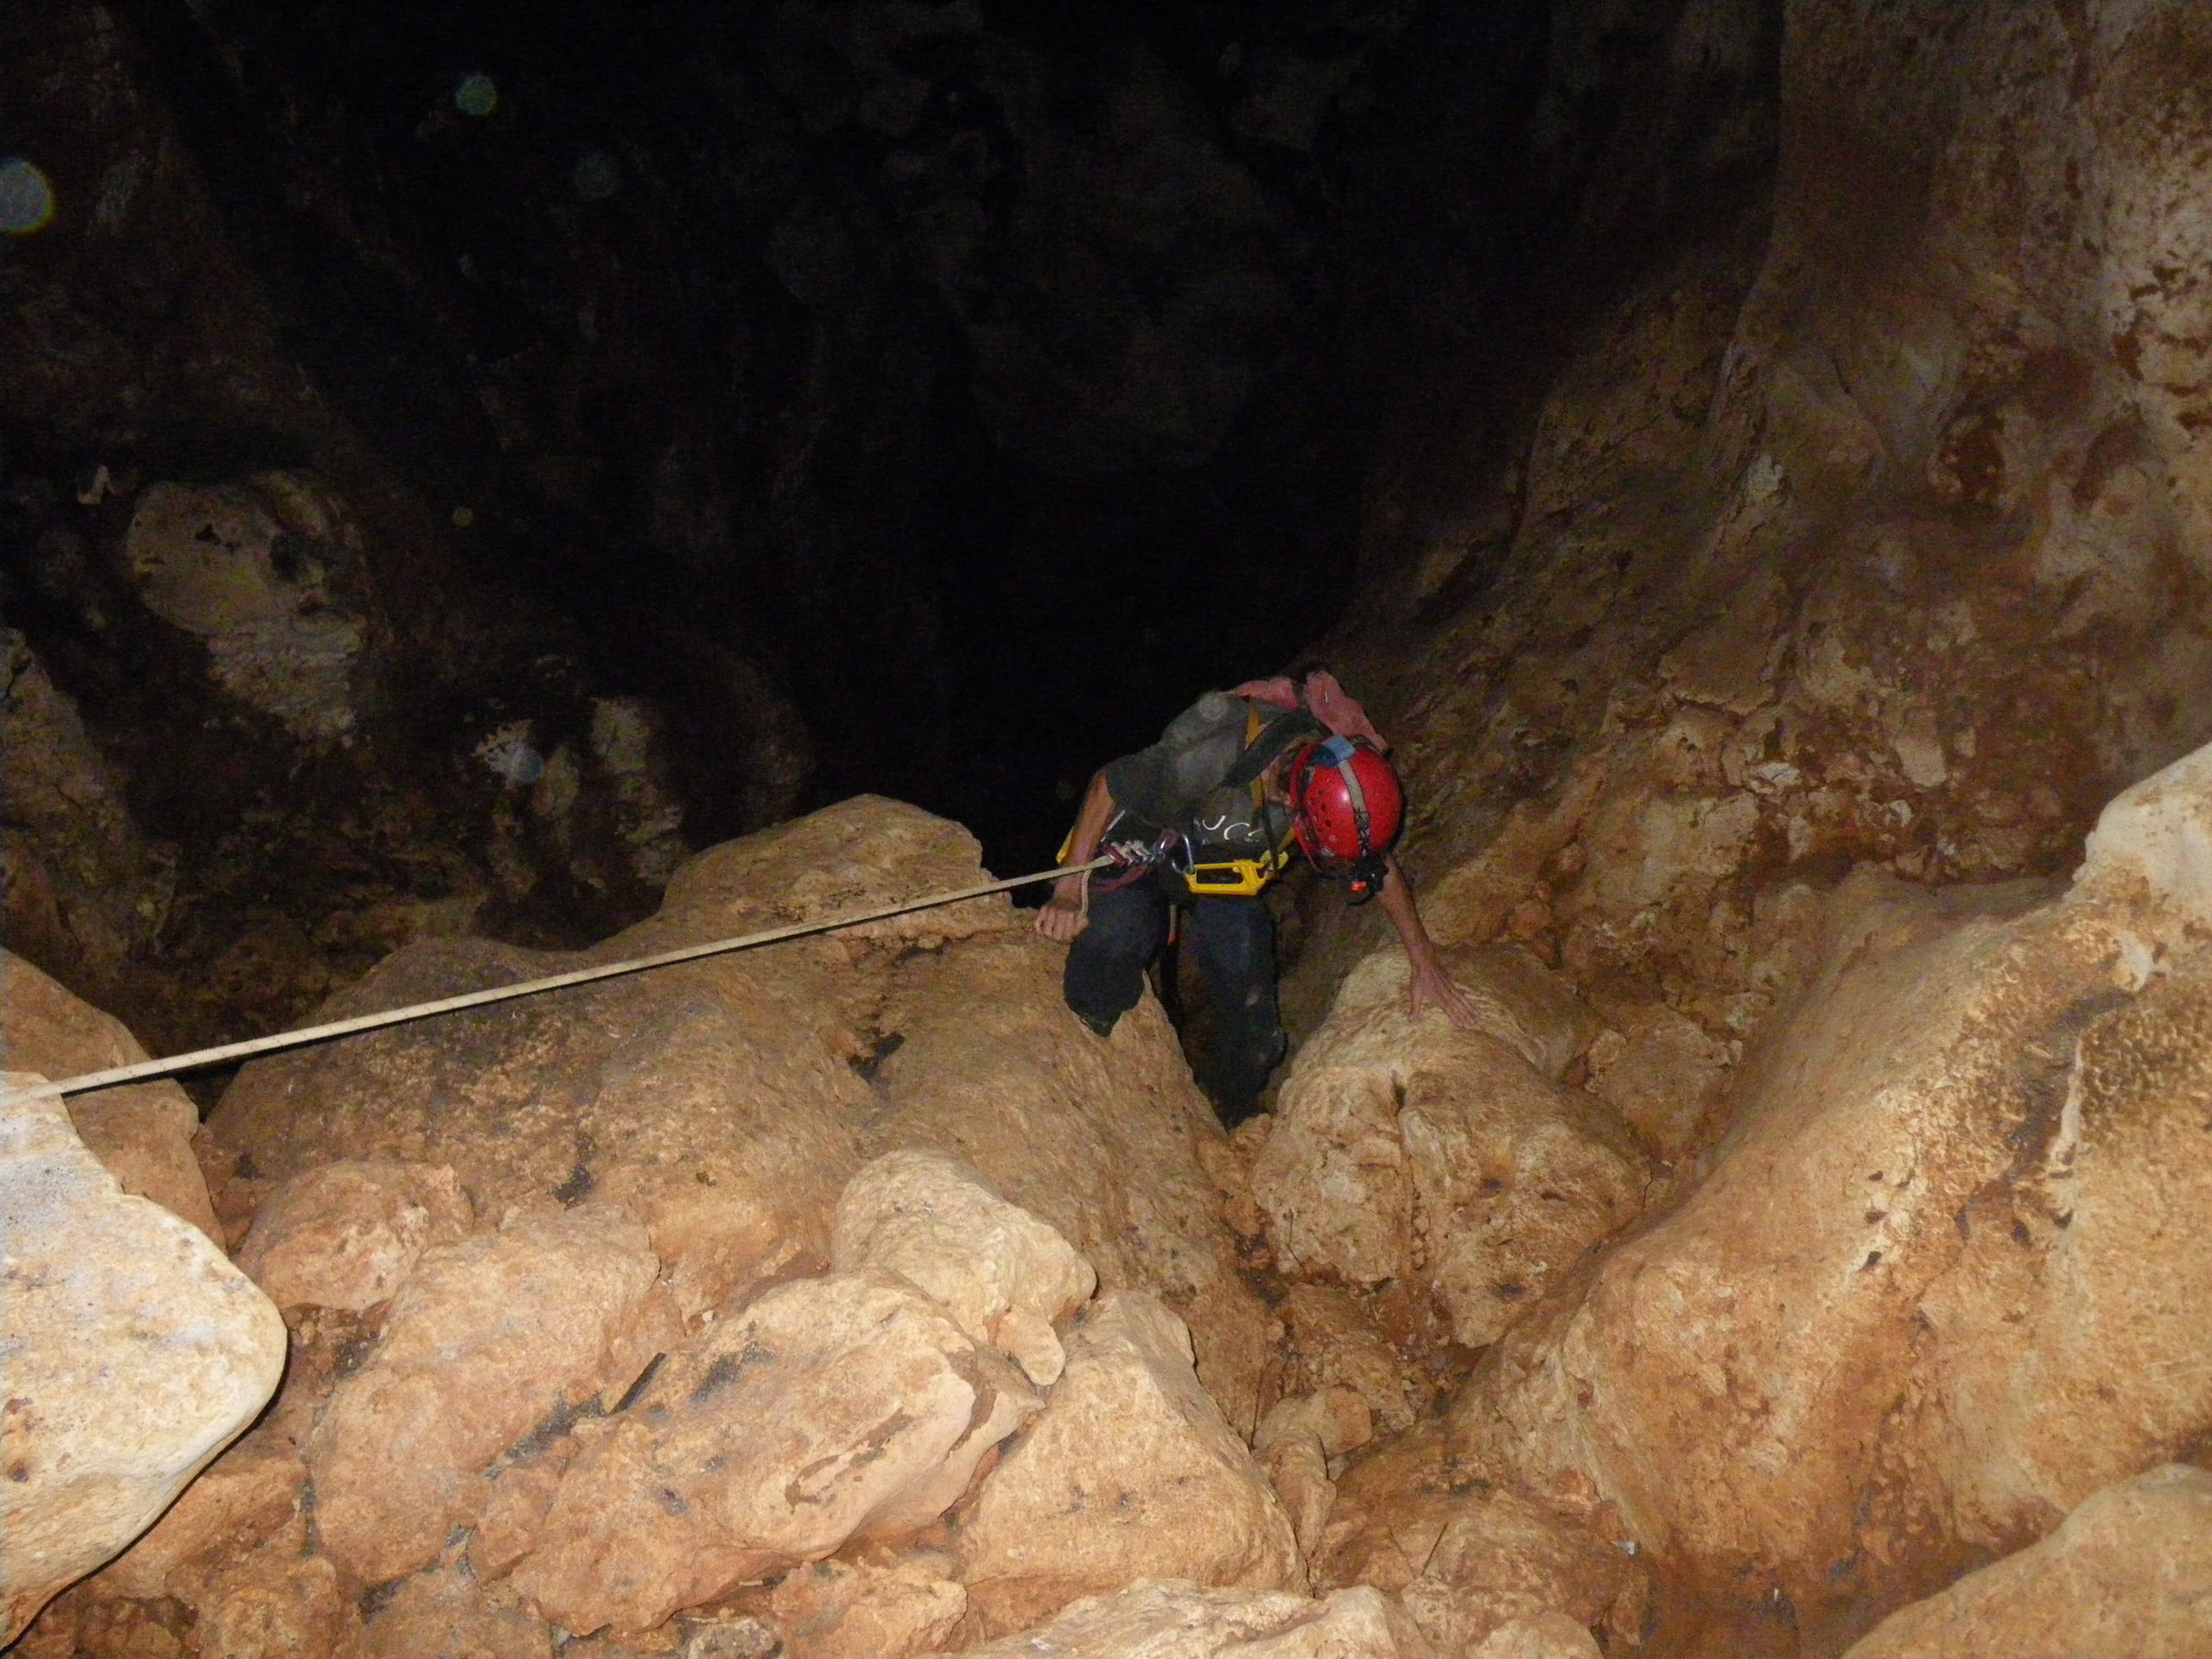 photograph of a man descenting into a vertical cave on a rope